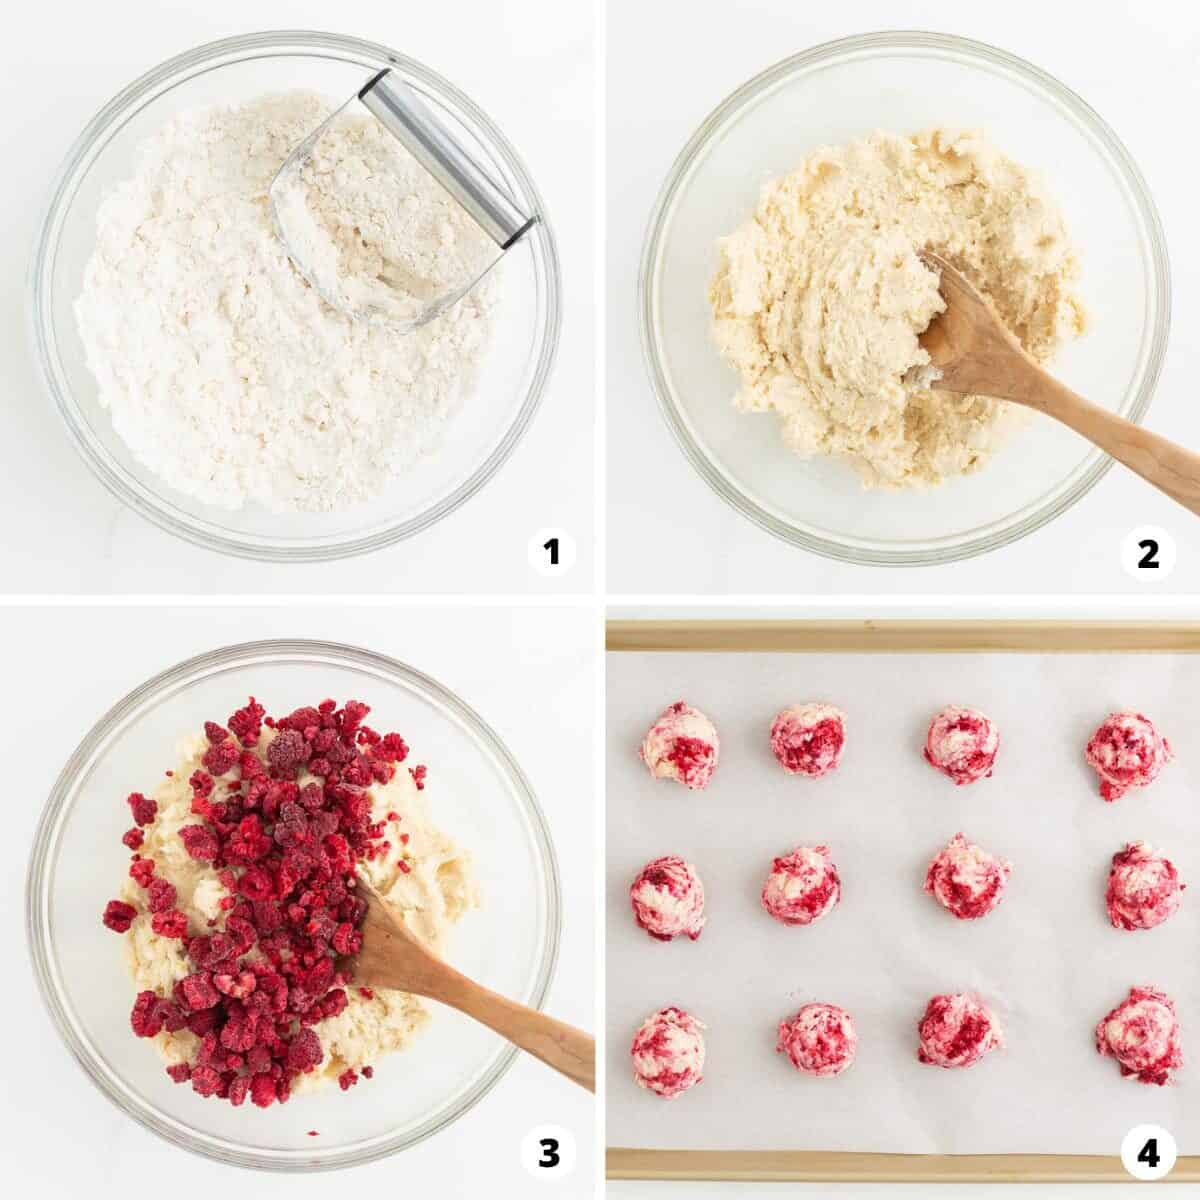 Showing how to make raspberry cookies.